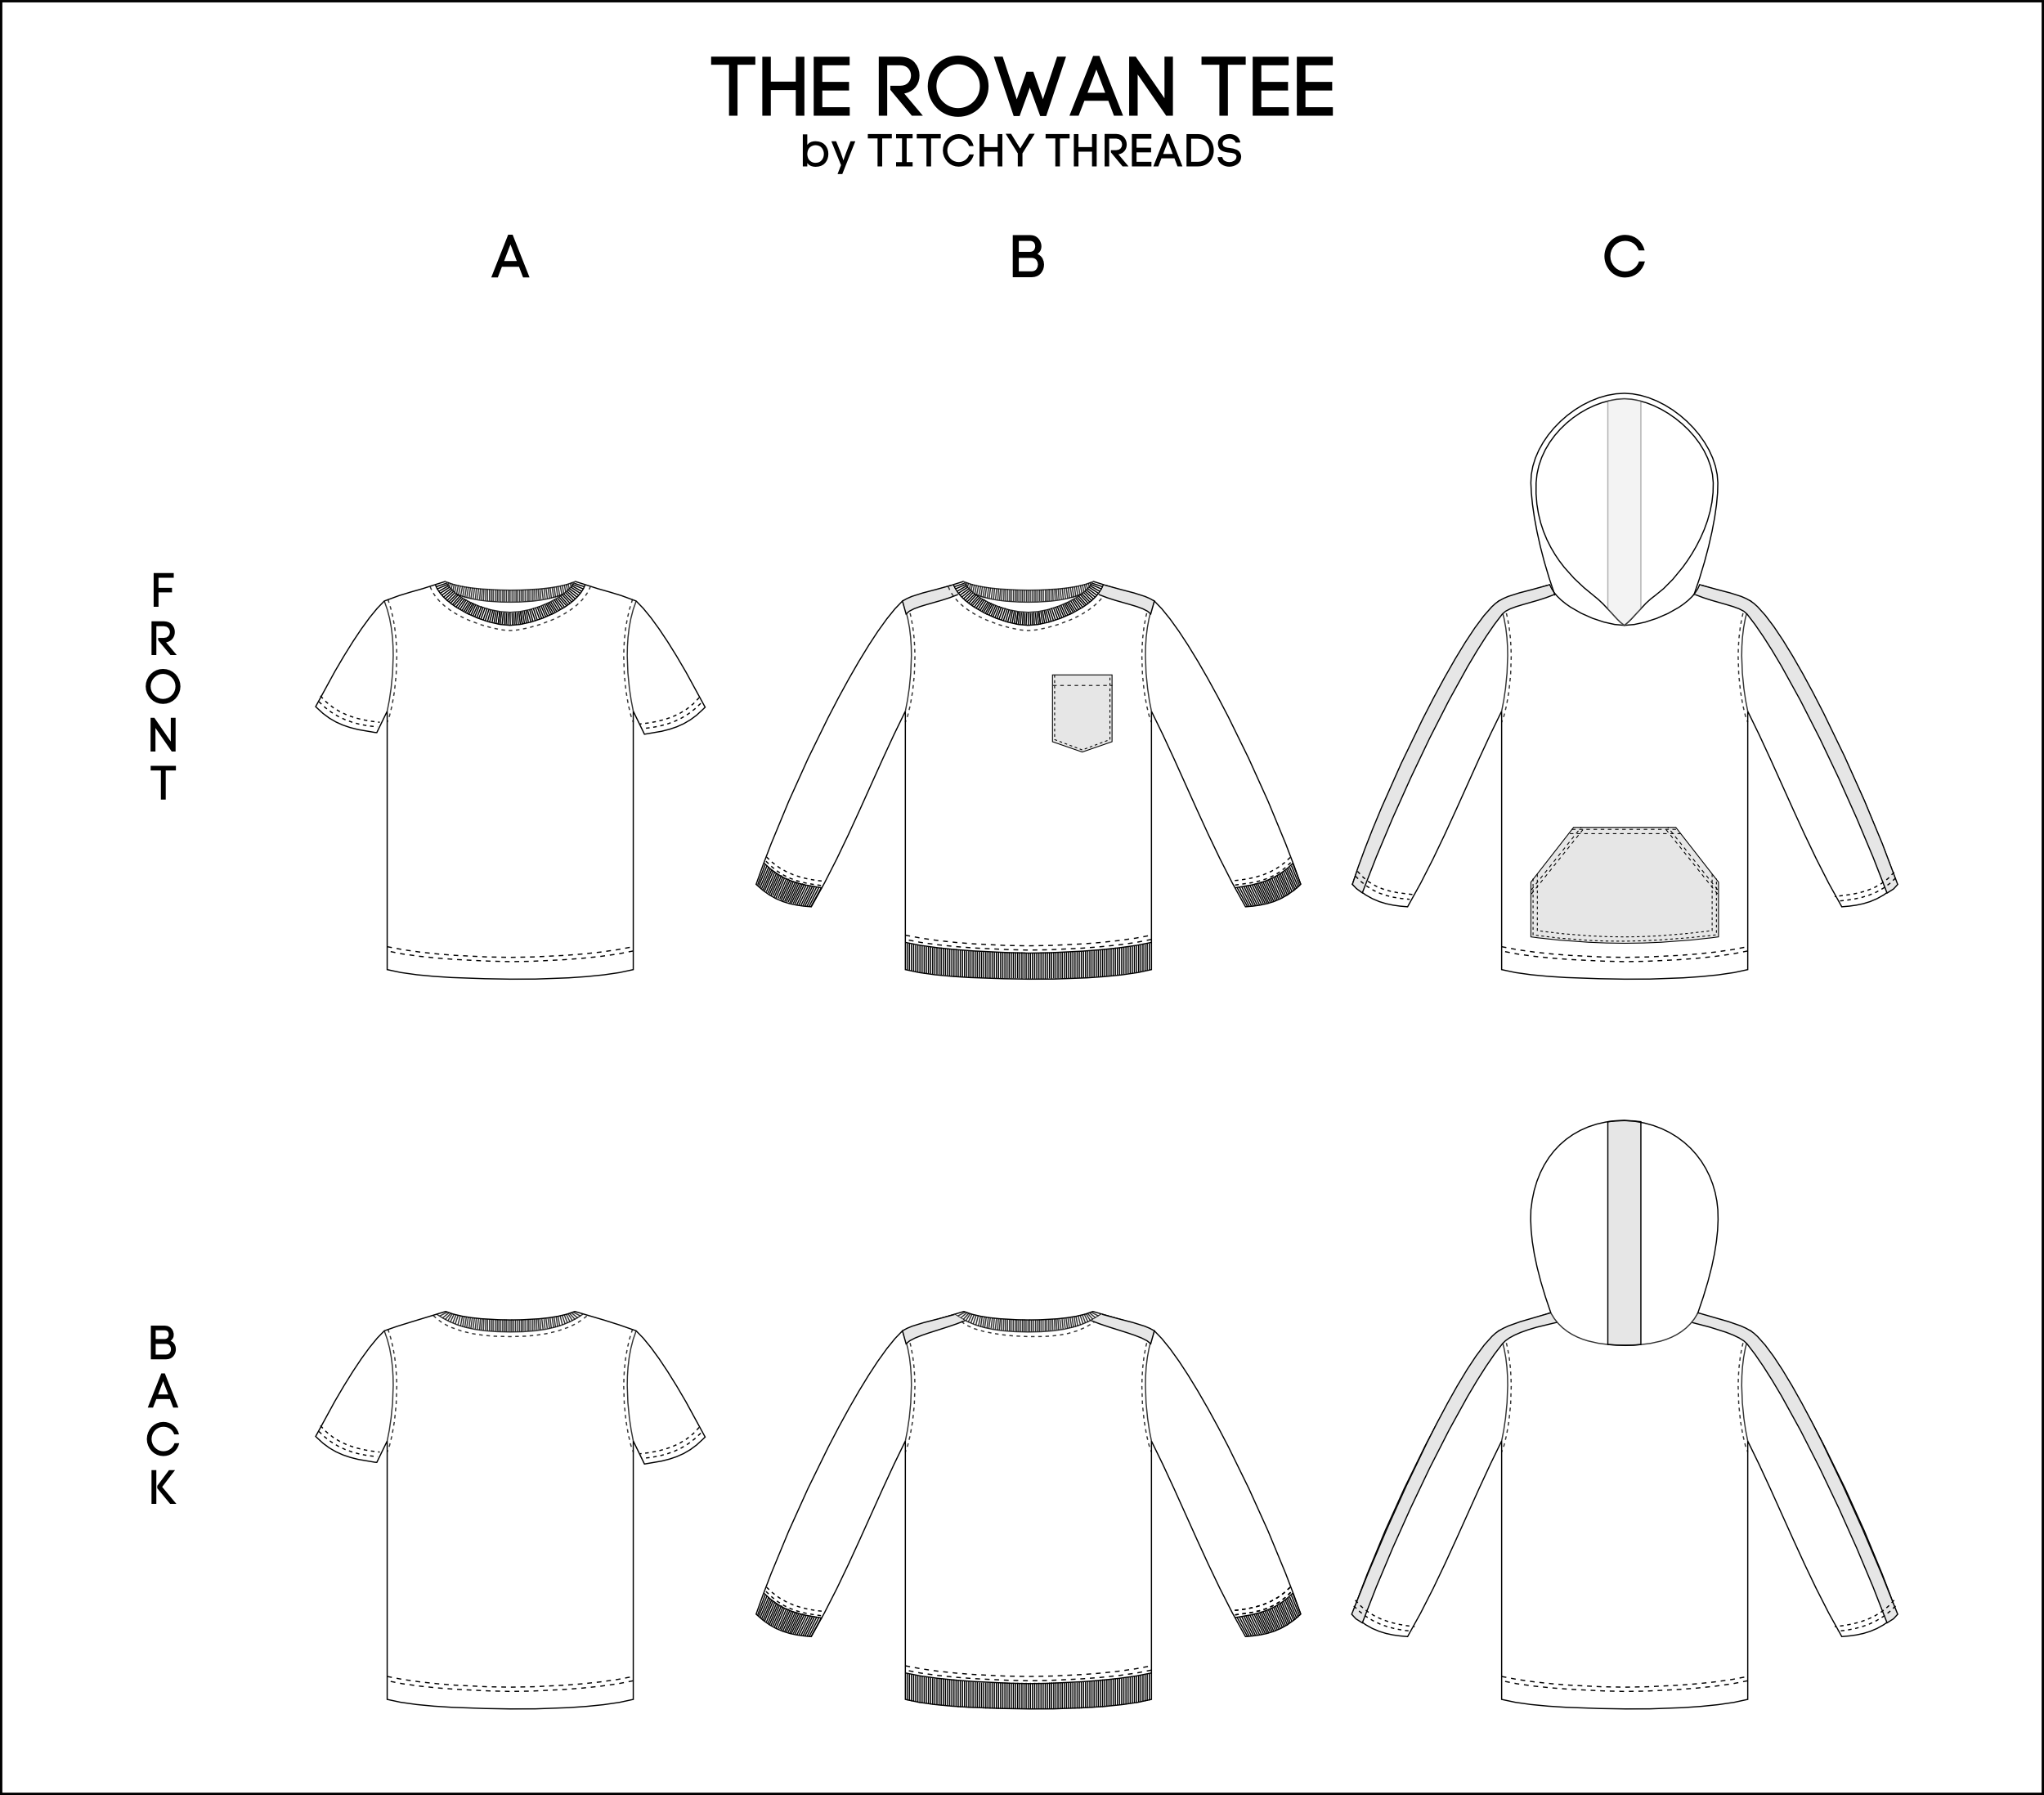 Rowan Tee Now Available – Craftstorming